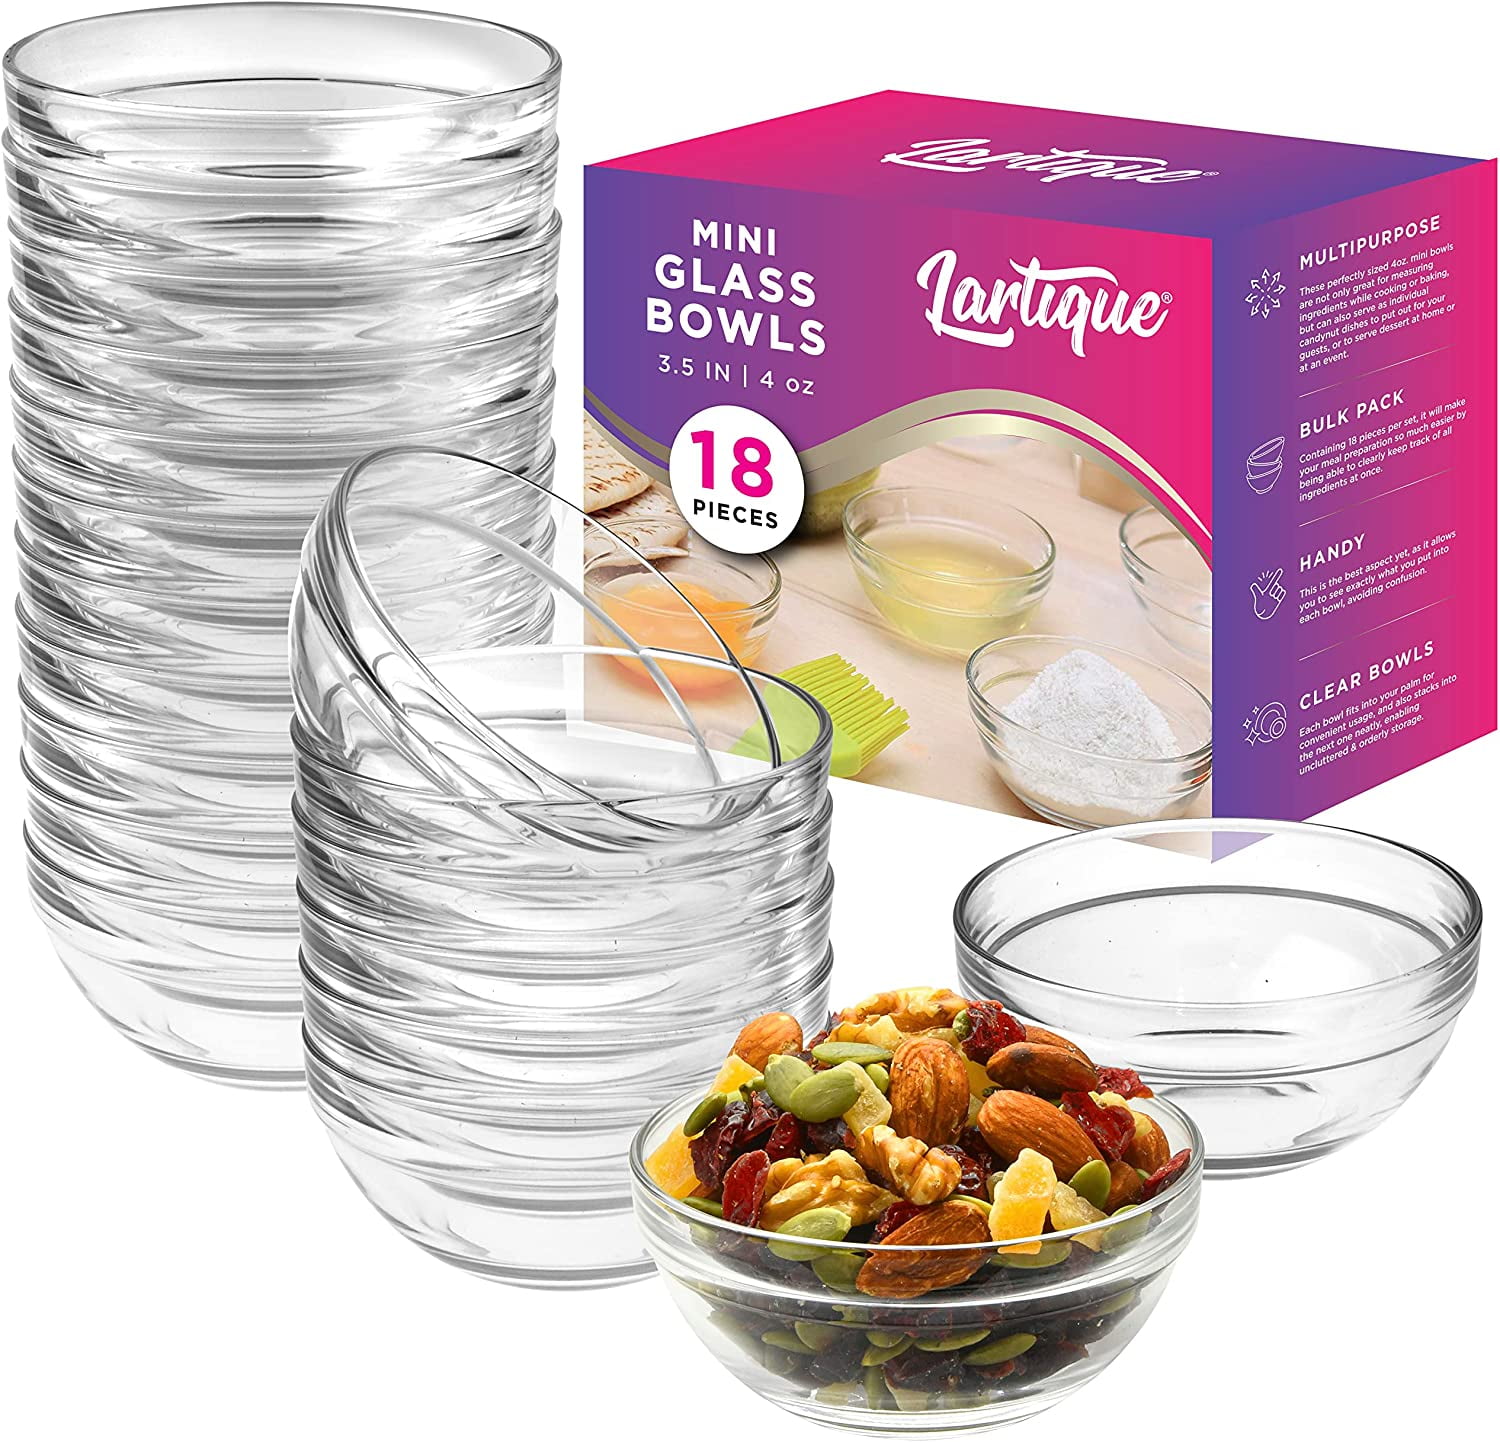 Best Glass Cooking Bowls [2018]: Mini 3.5 Inch Glass Bowls for Kitchen  Prep, Dessert, Dips, and 